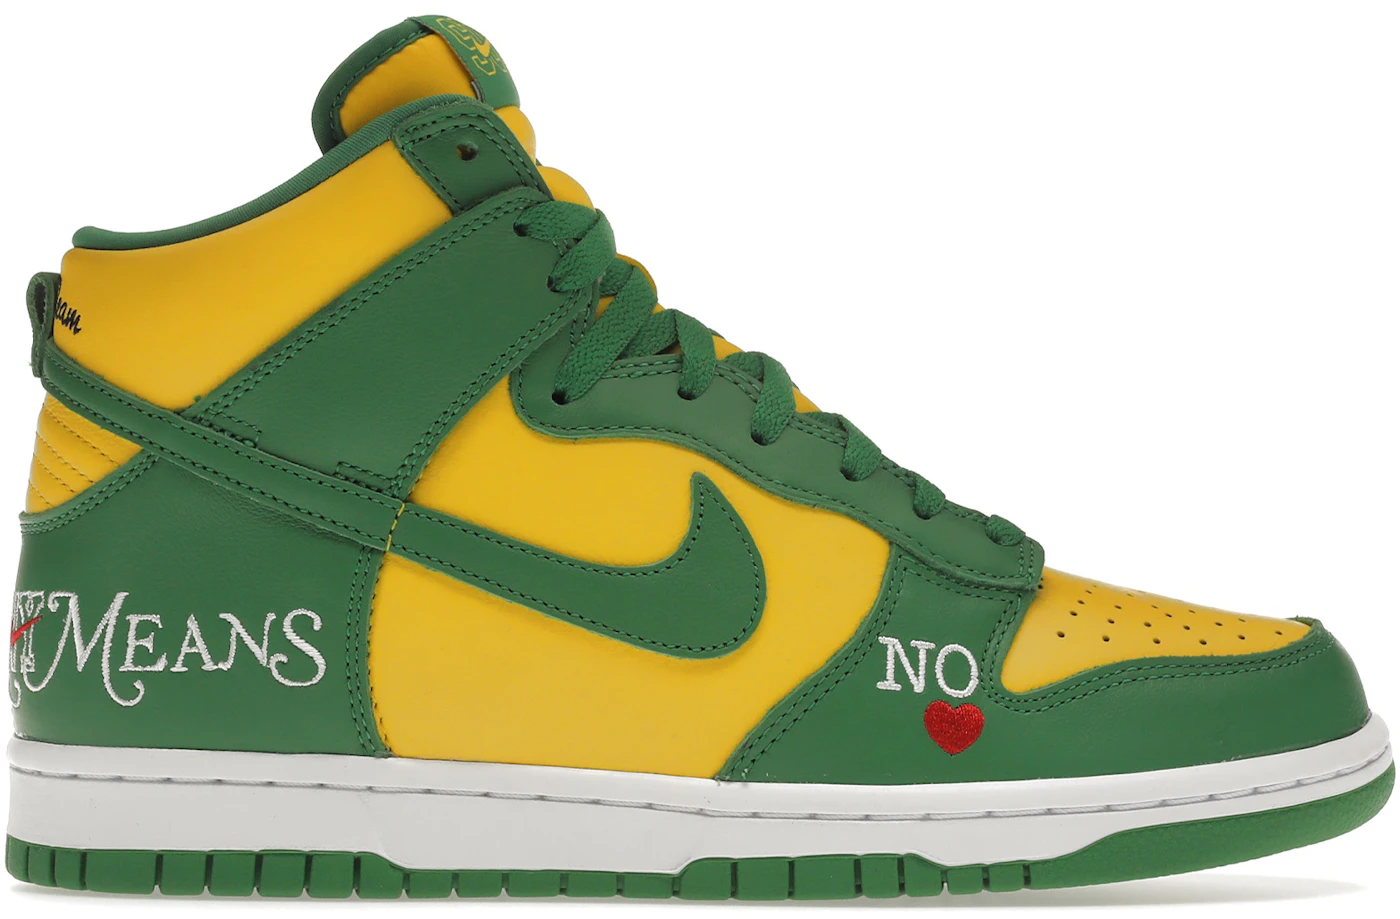 Nike SB Dunk High Supreme By Any Means Brazil Men's - DN3741-700 - US